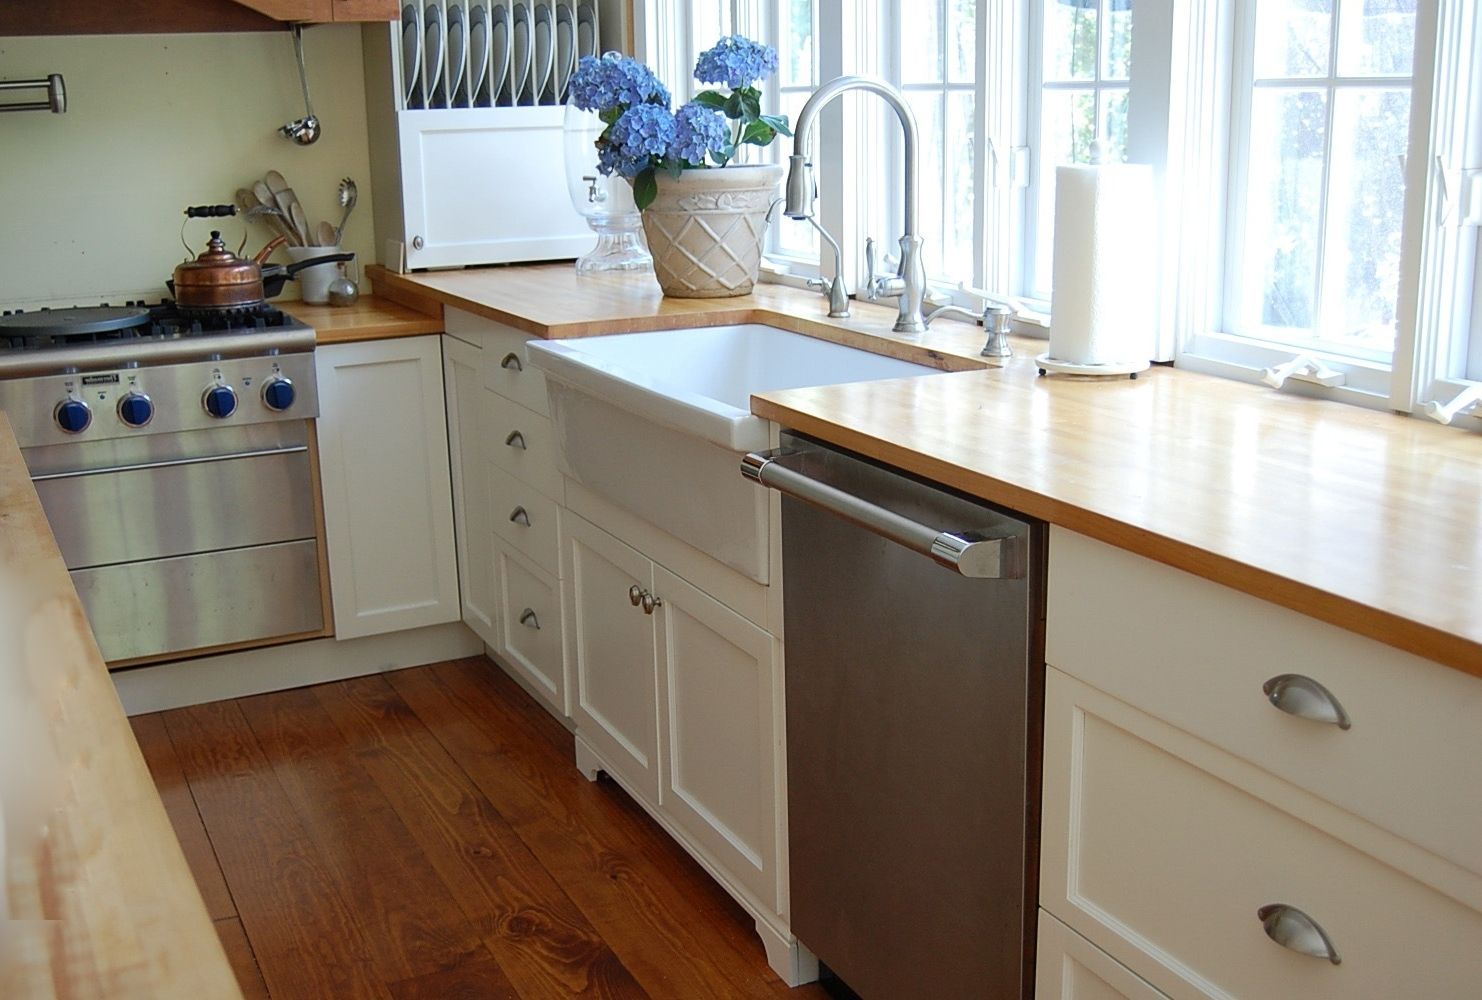 Modular Kitchen Sink For Small Space (Photo 141 of 35622)